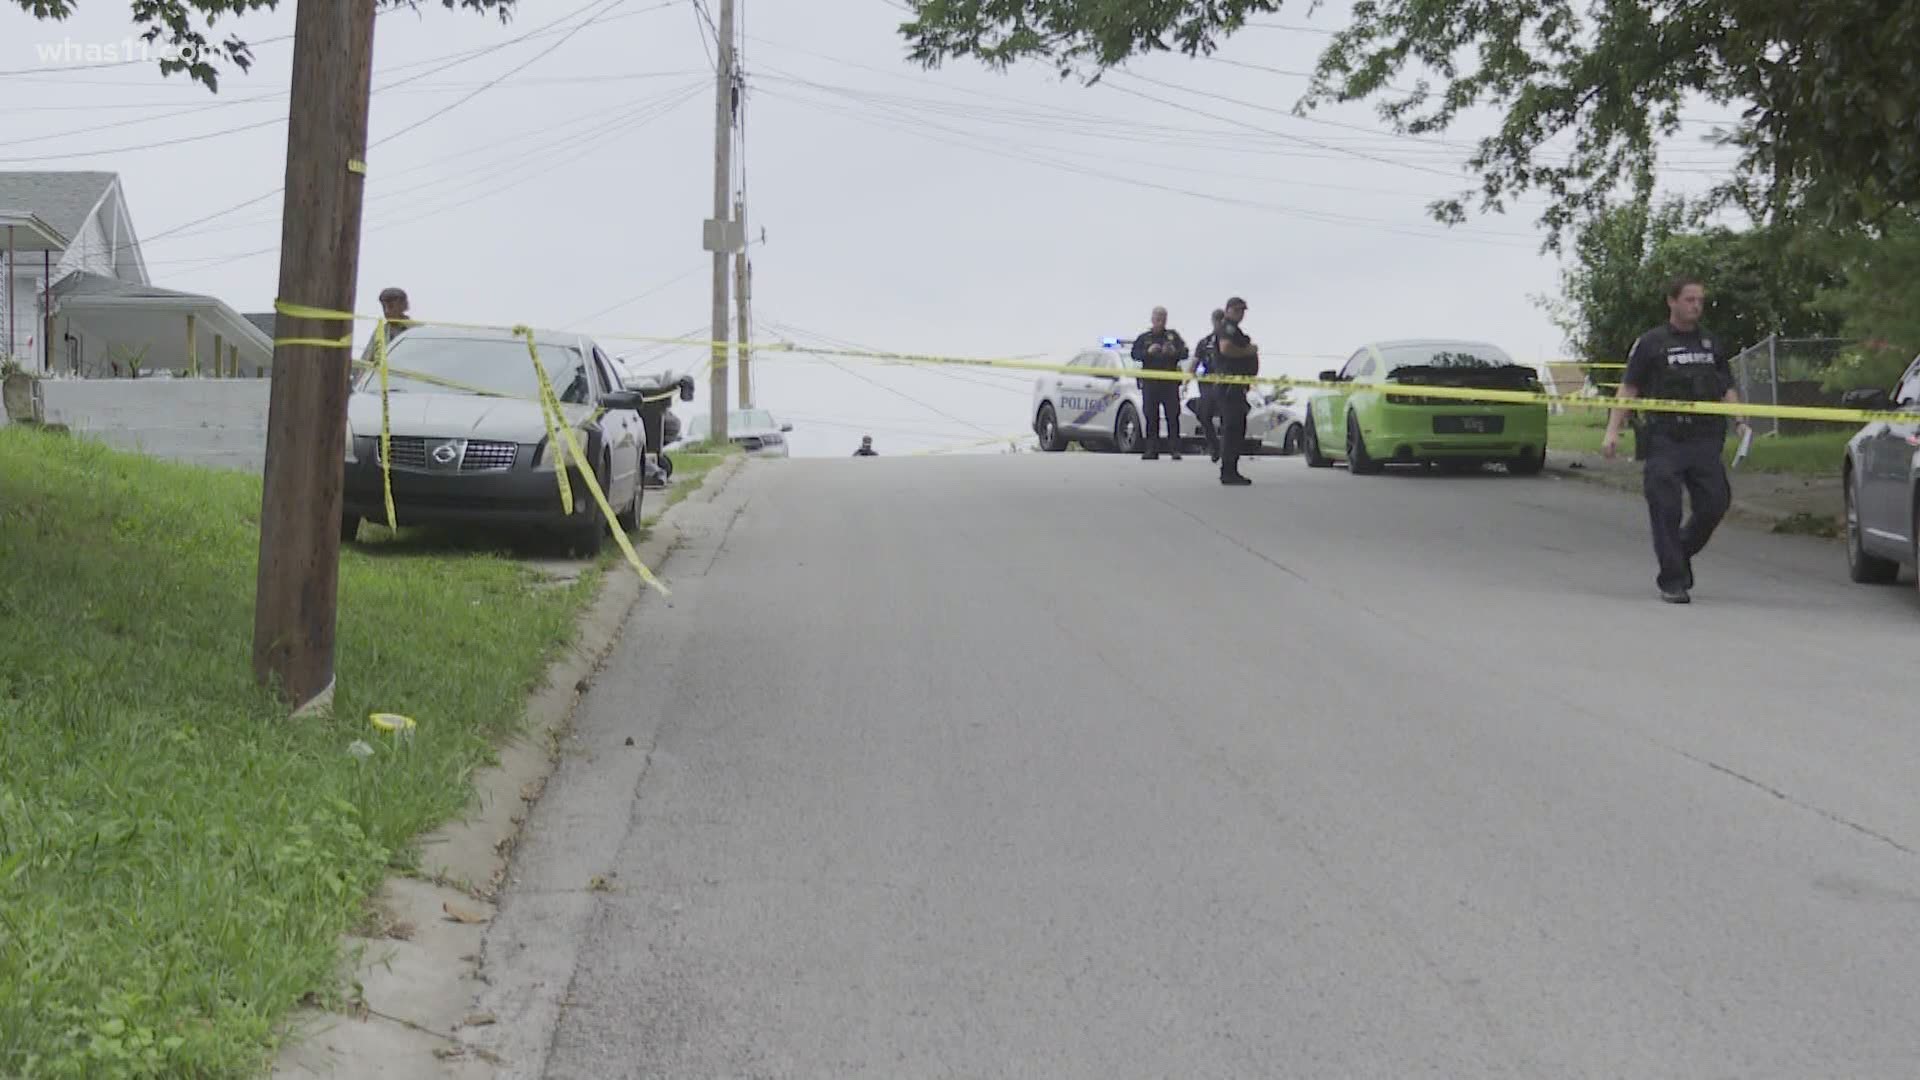 Two people died following a shooting on Arling Avenue, just north of Louisville's Iroquois Park.